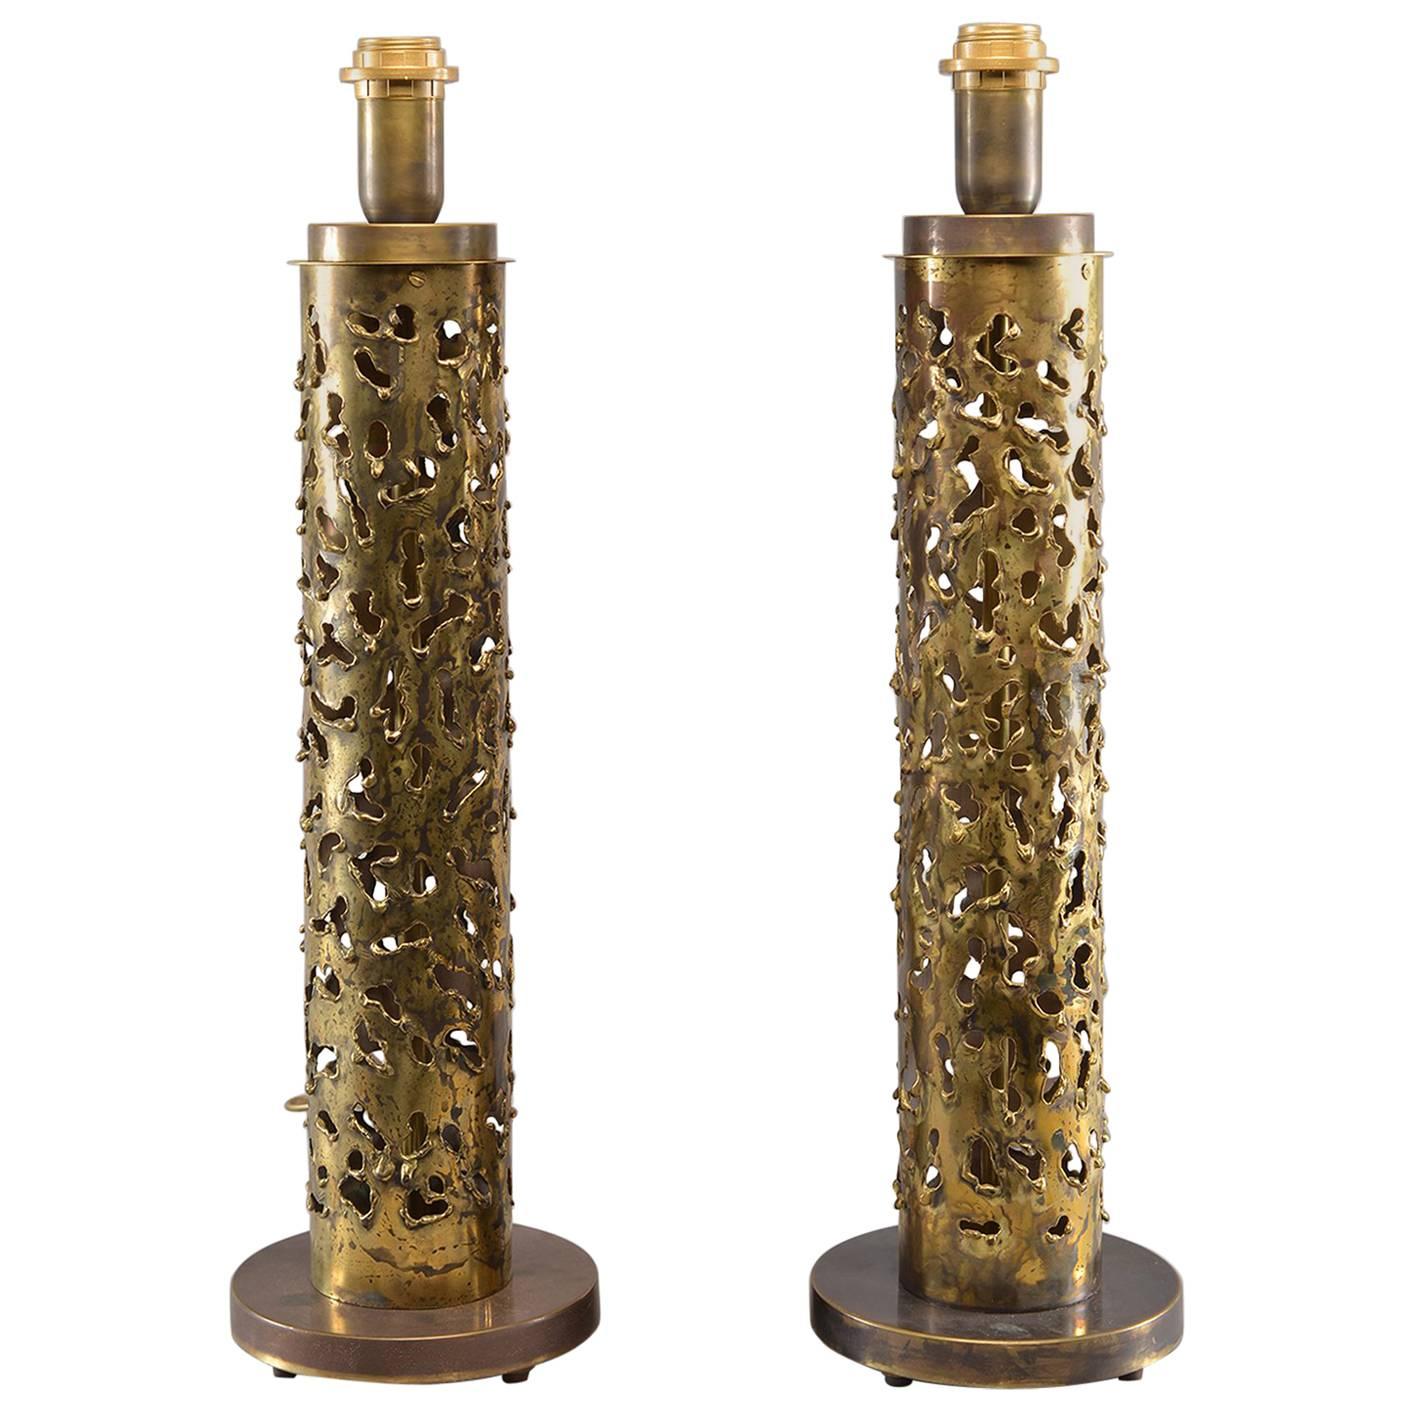 Pair of Italian Brutalist Style Torch Cut Brass Tall Narrow Lamps